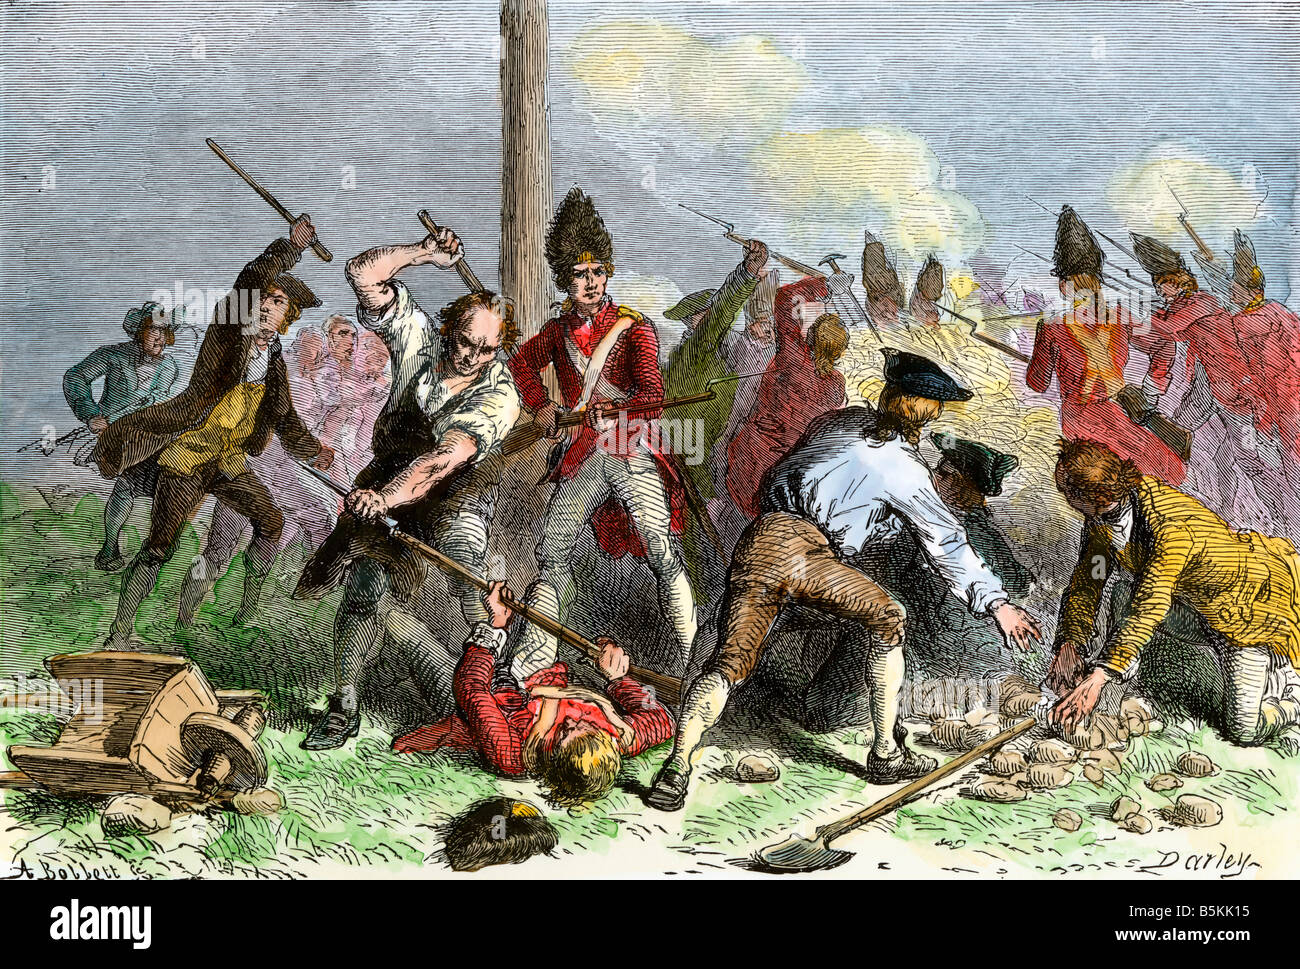 Defense of the Liberty Pole by colonial patriots in New York 1760s. Hand-colored woodcut Stock Photo